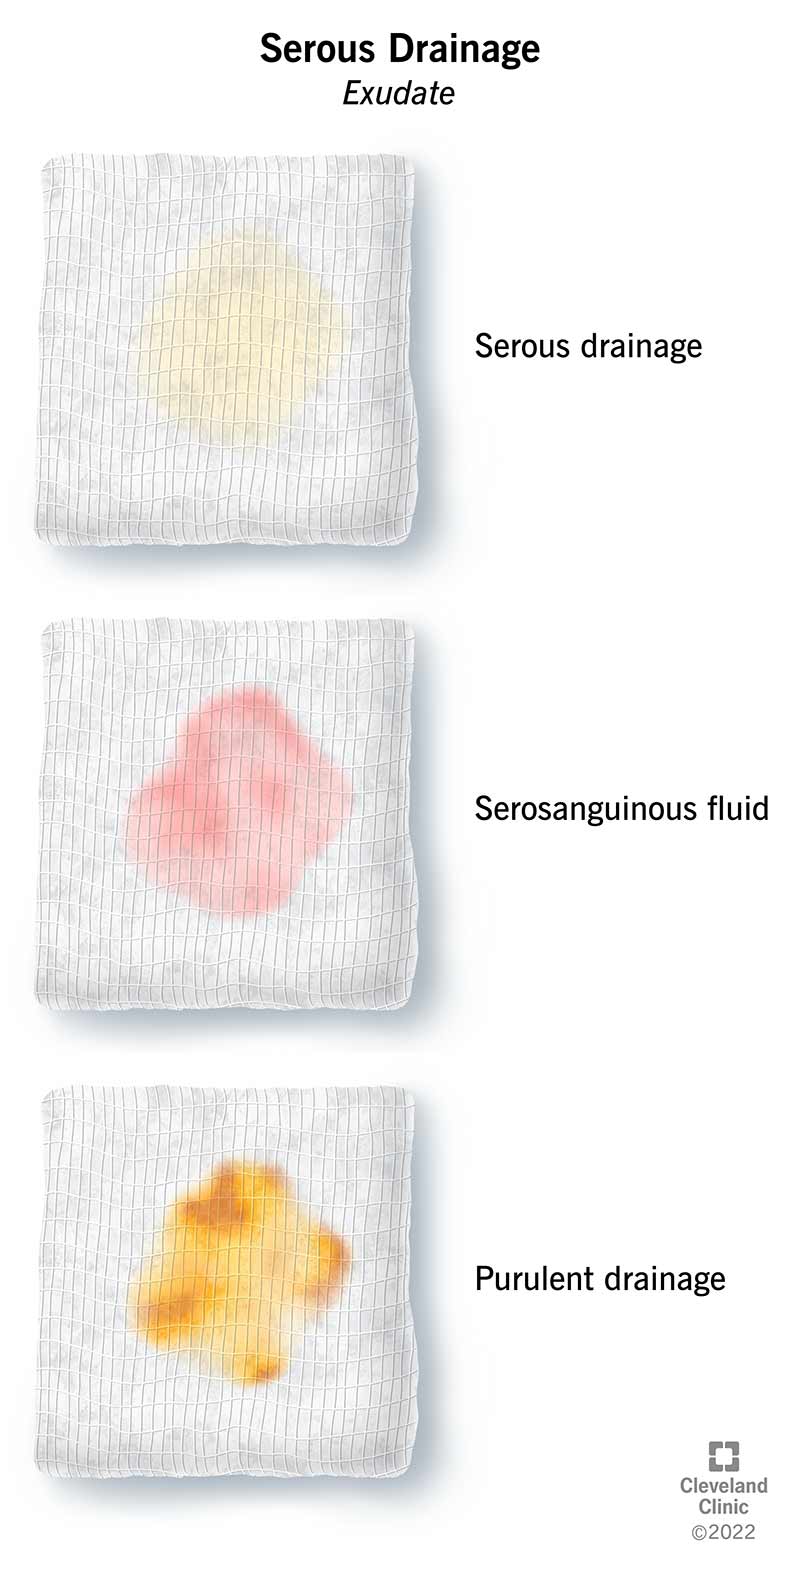 An illustration of three wound dressings with serous drainage and other types of exudate.